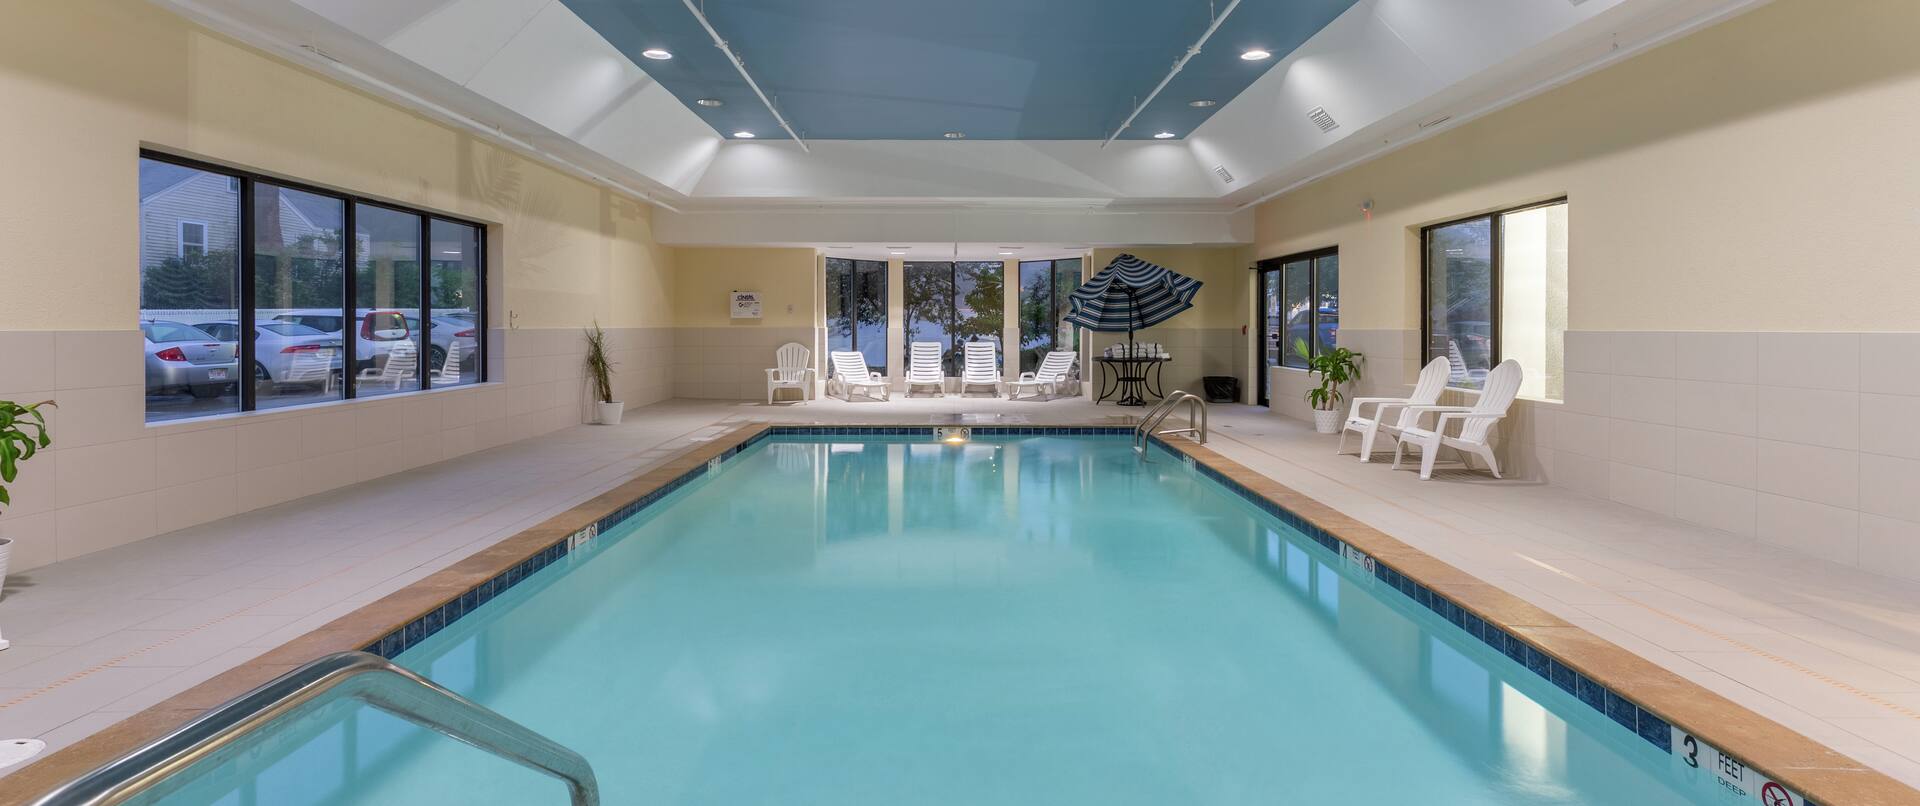 Indoor pool with chair